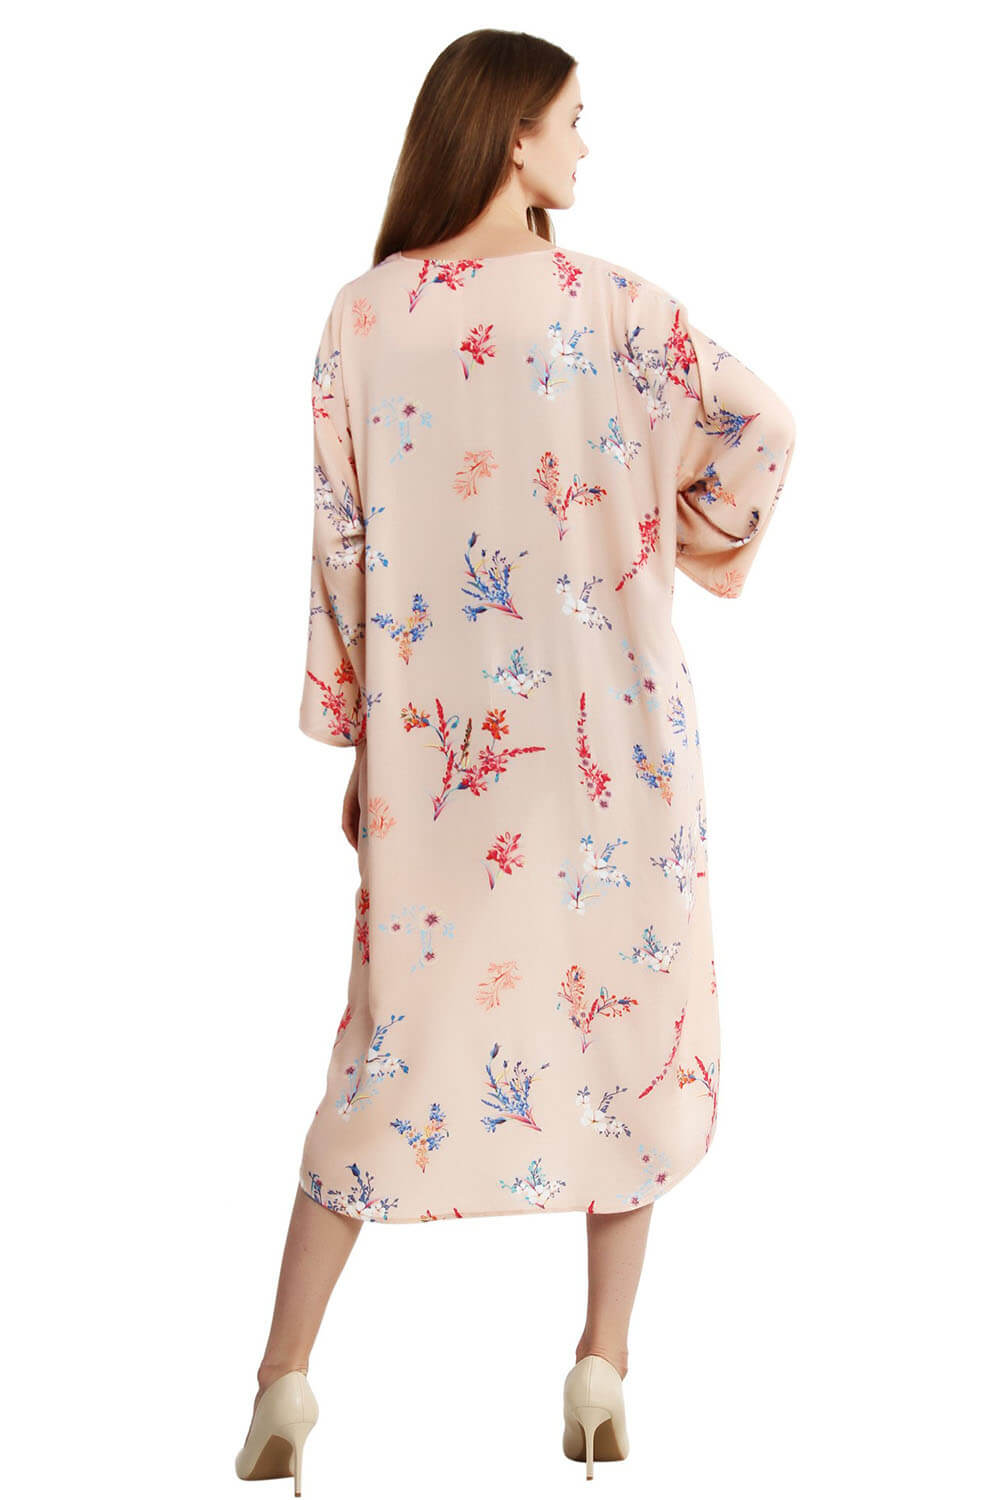 Blooms in Motion High-Low Kimono